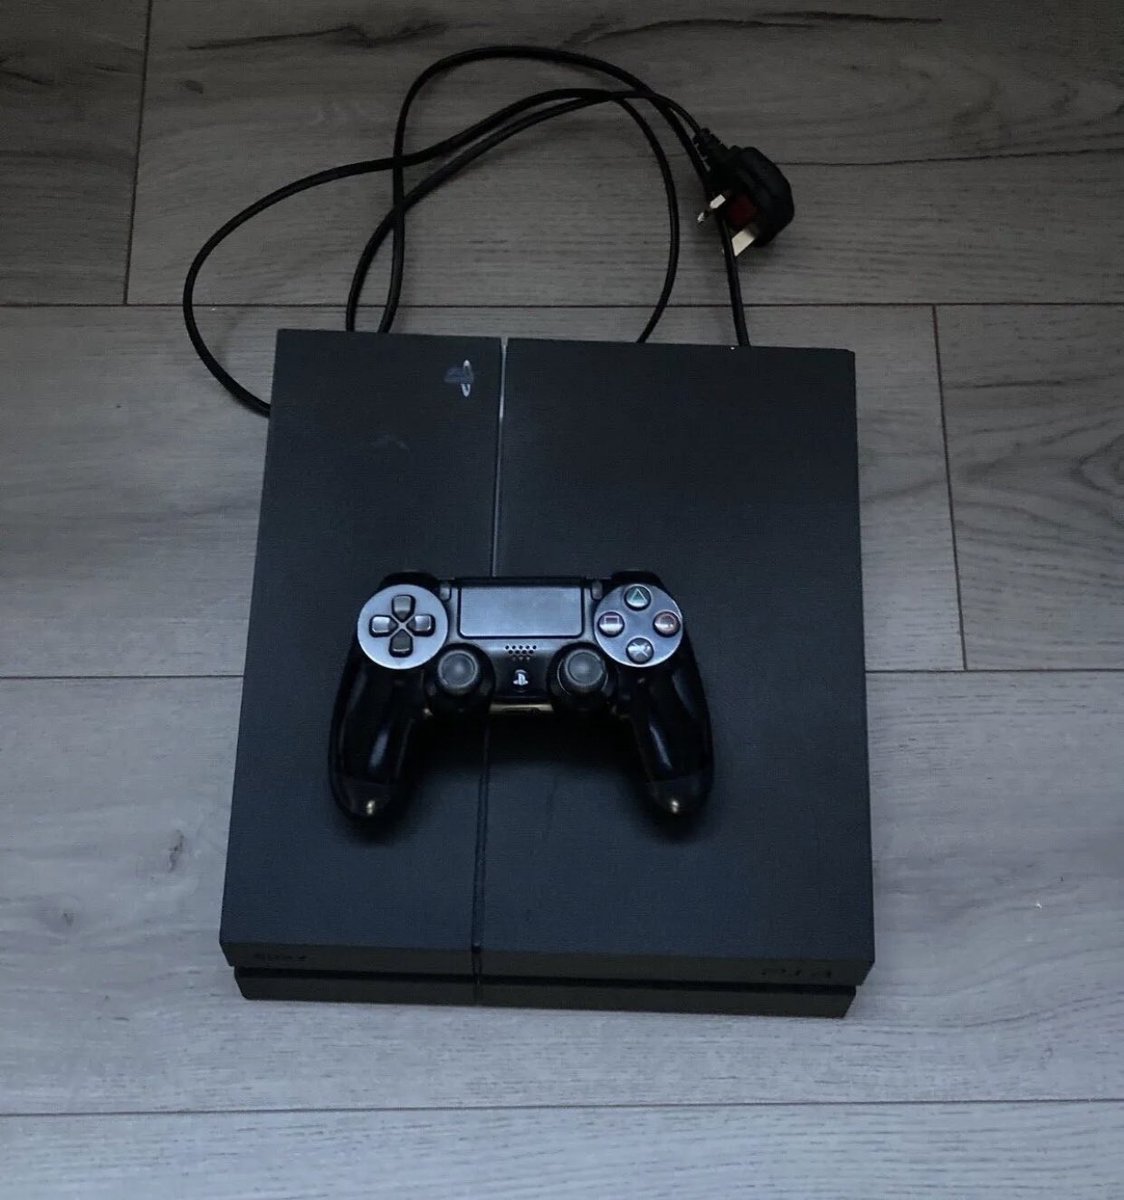 RT @deoullsdedit: PlayStation 4. 500GB
v9.51
Comes with FIFA 18 and one controller. 

K4,000

-0976319191 https://t.co/bkRl4S9MYx